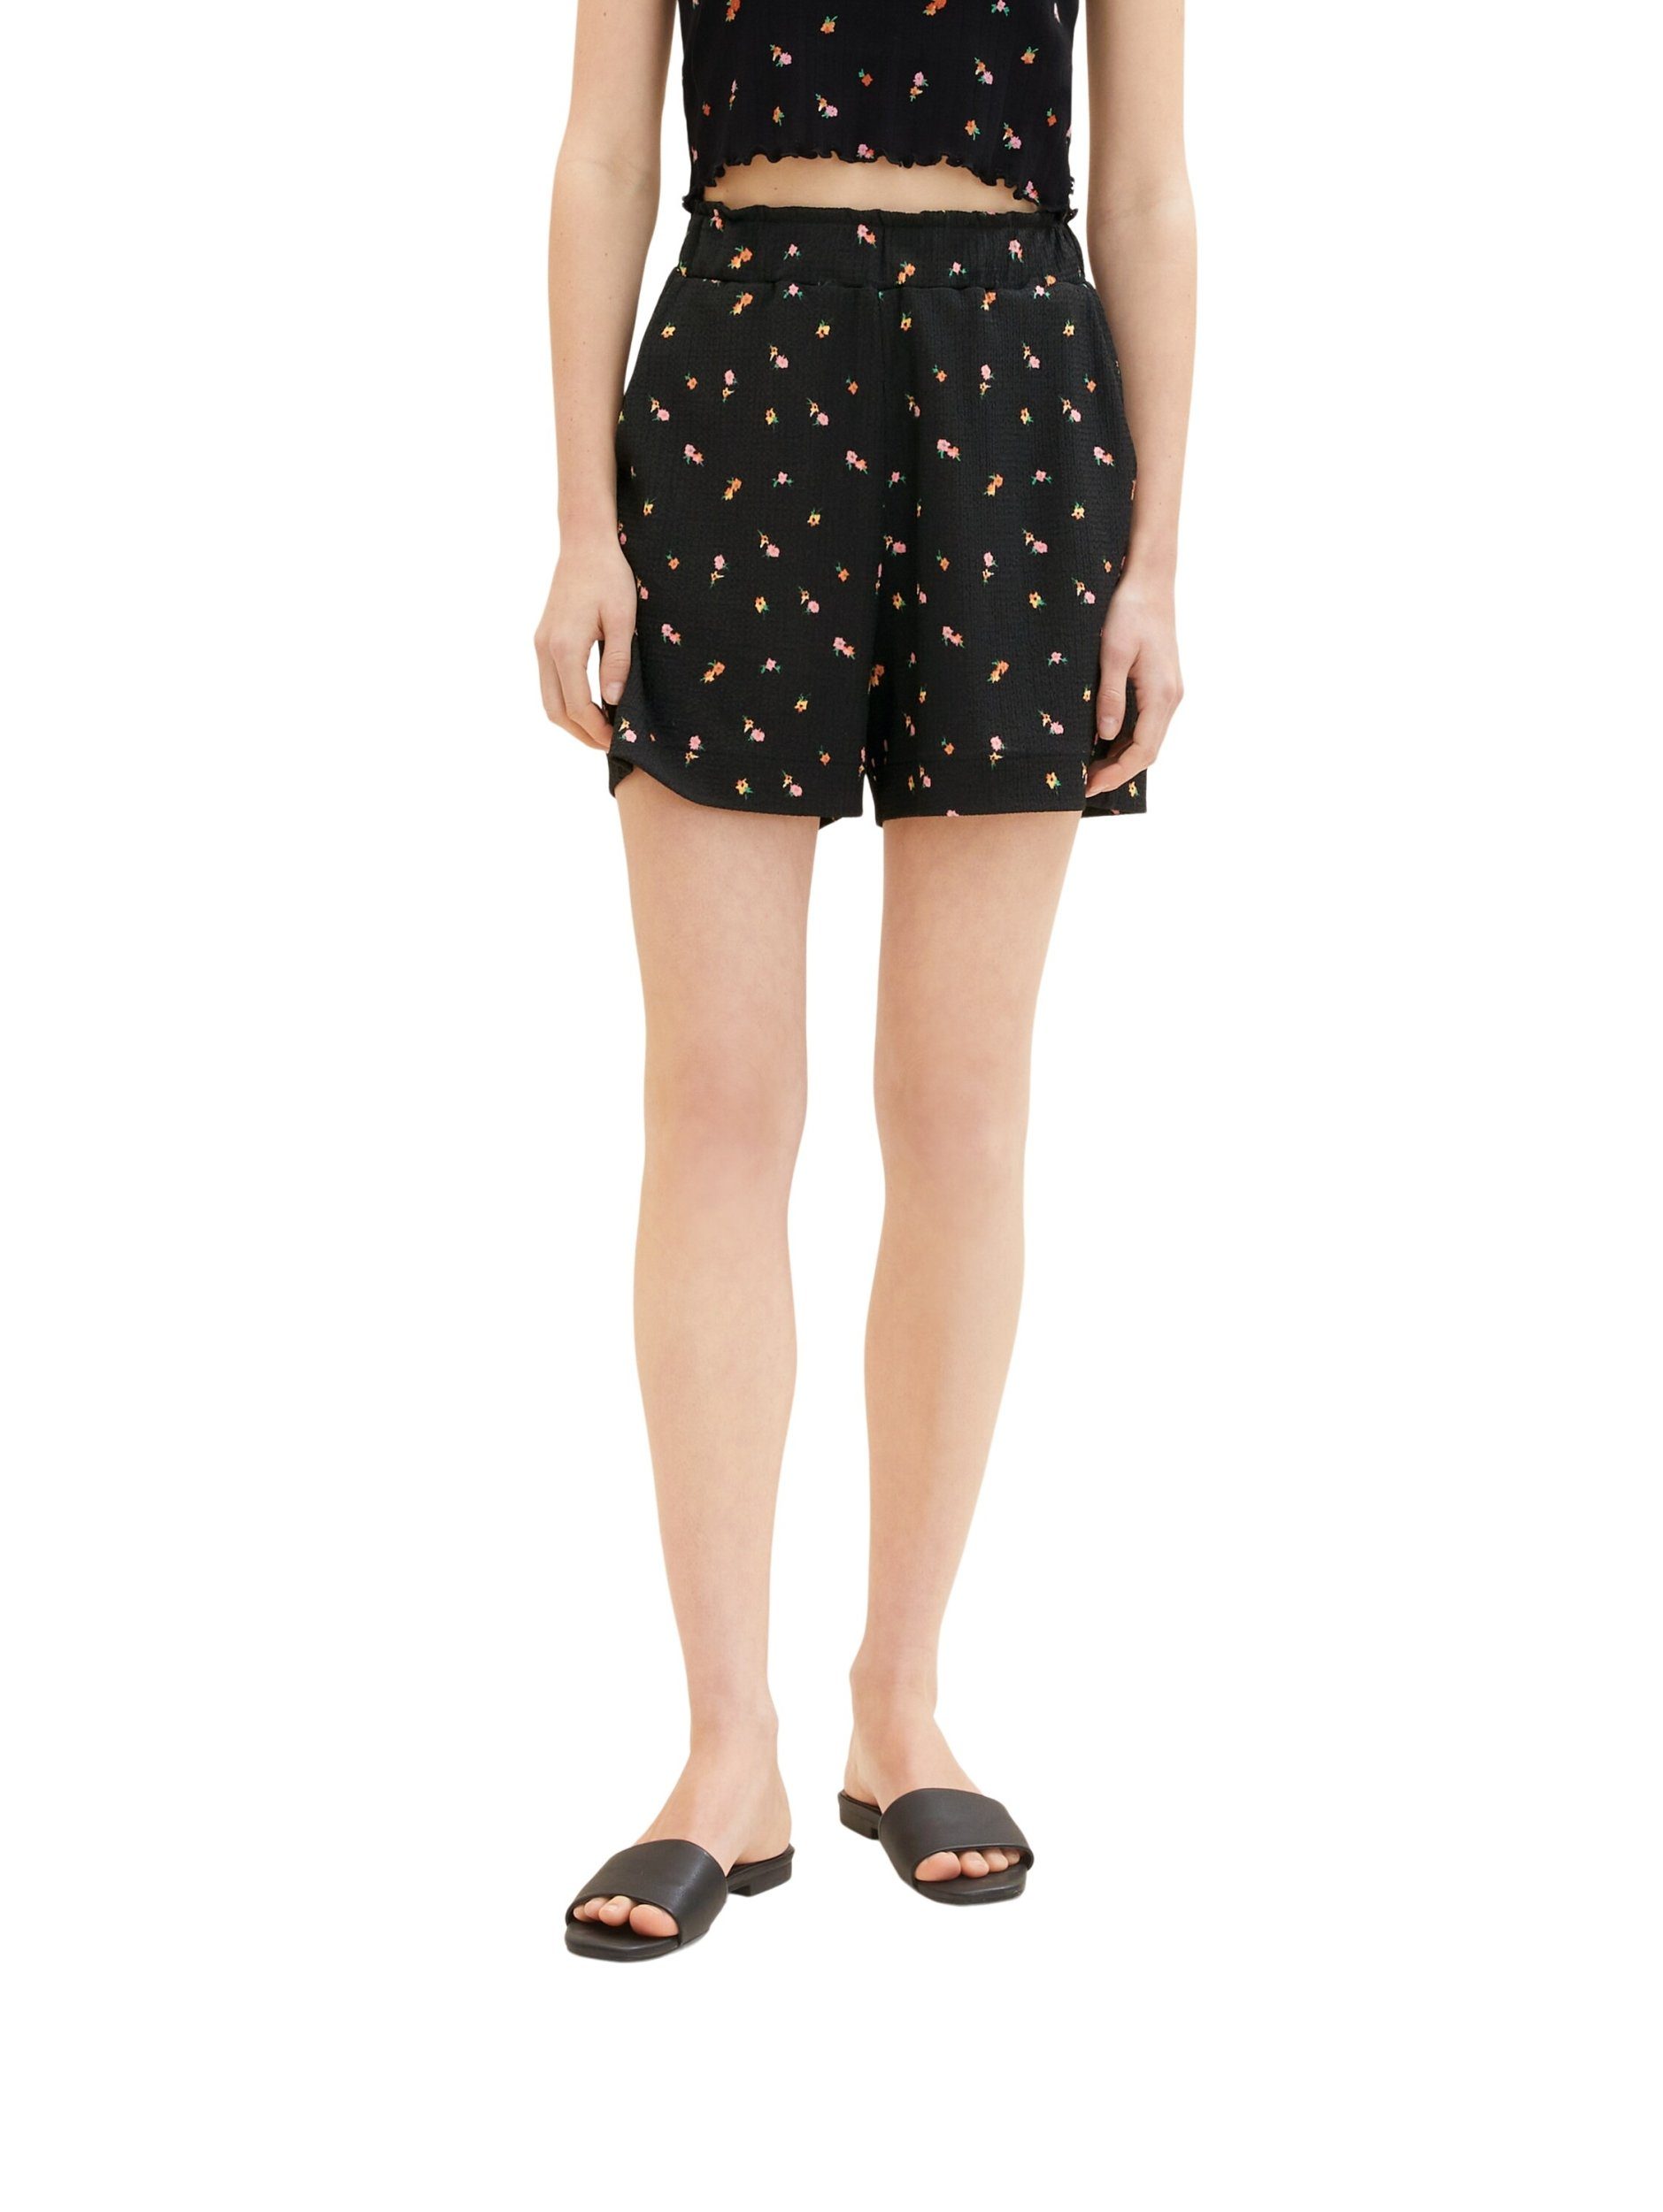 TAILOR Shorts black 31950 print shorts flower small TOM Easy structured